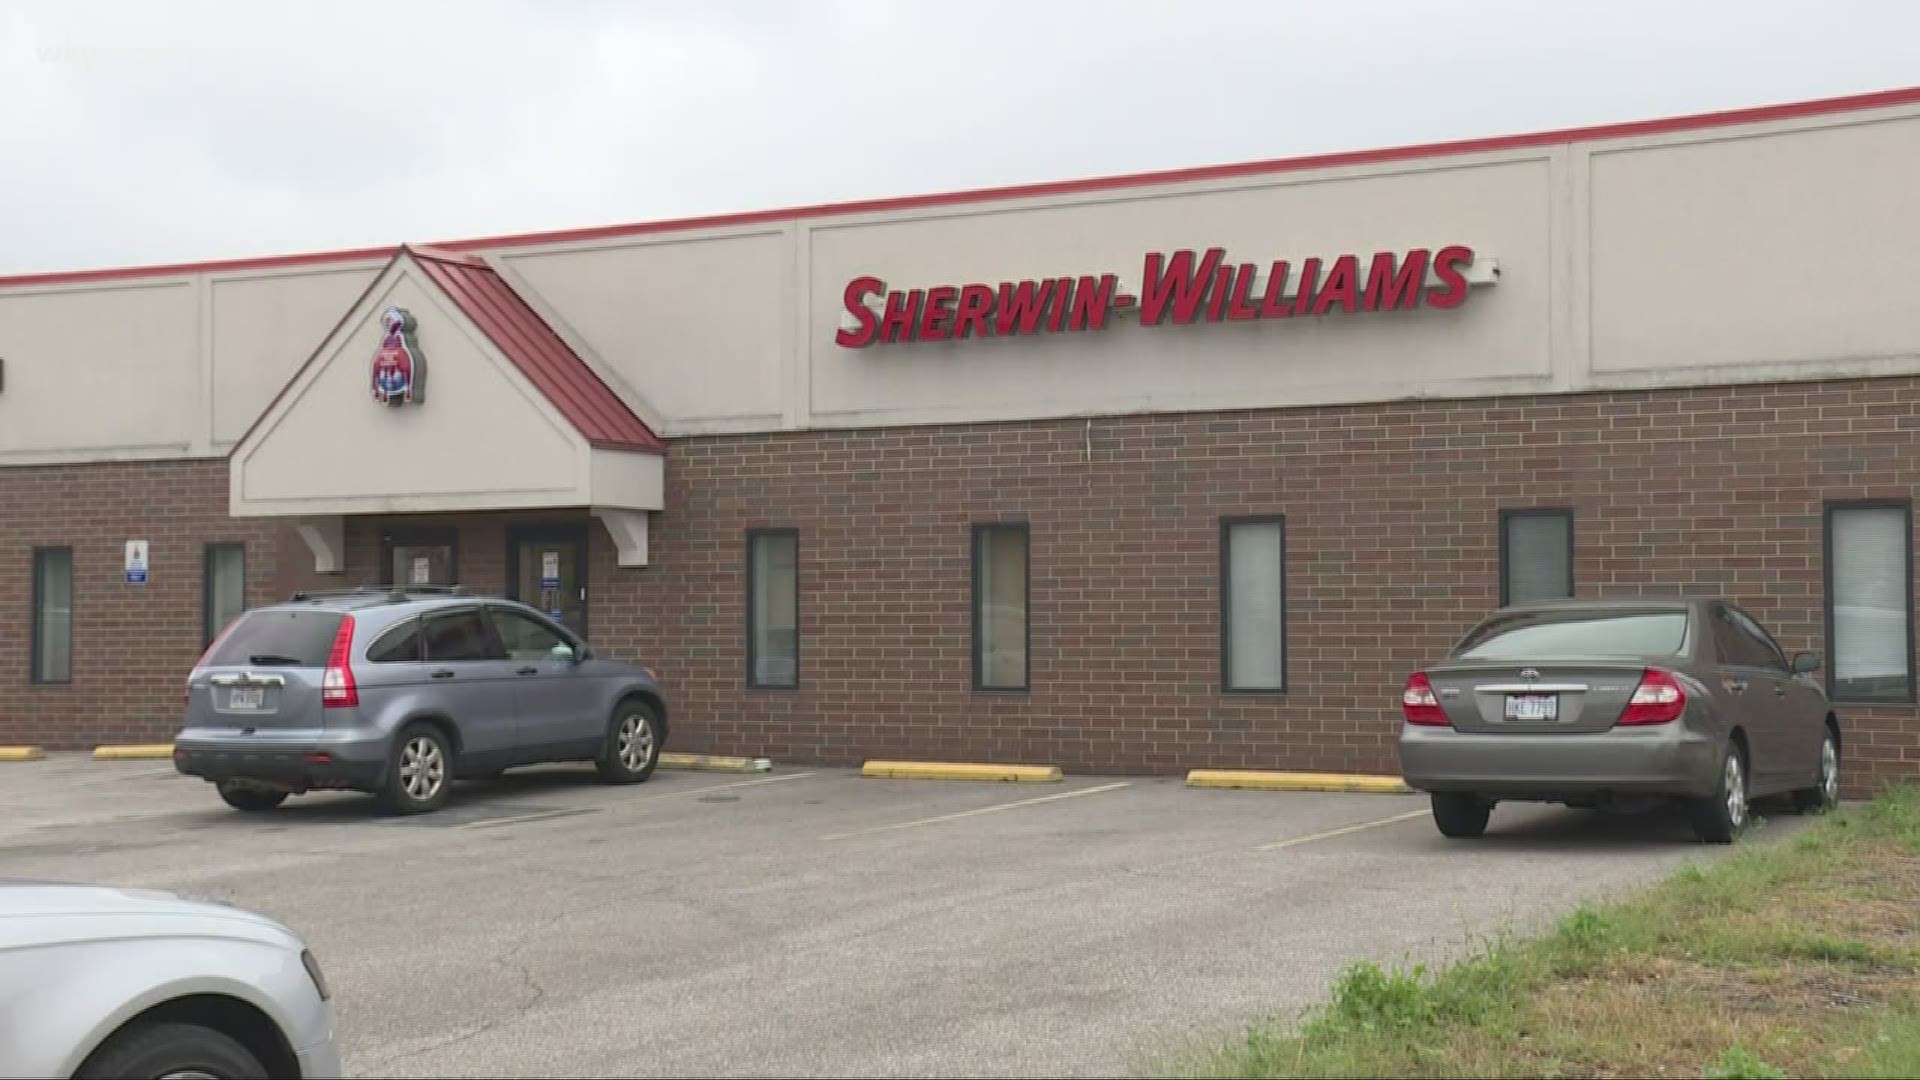 Sherwin-Williams Co., global paint company headquartered in Cleveland for more than 150 years, is expected to announced Thursday that it will remain in the region, s